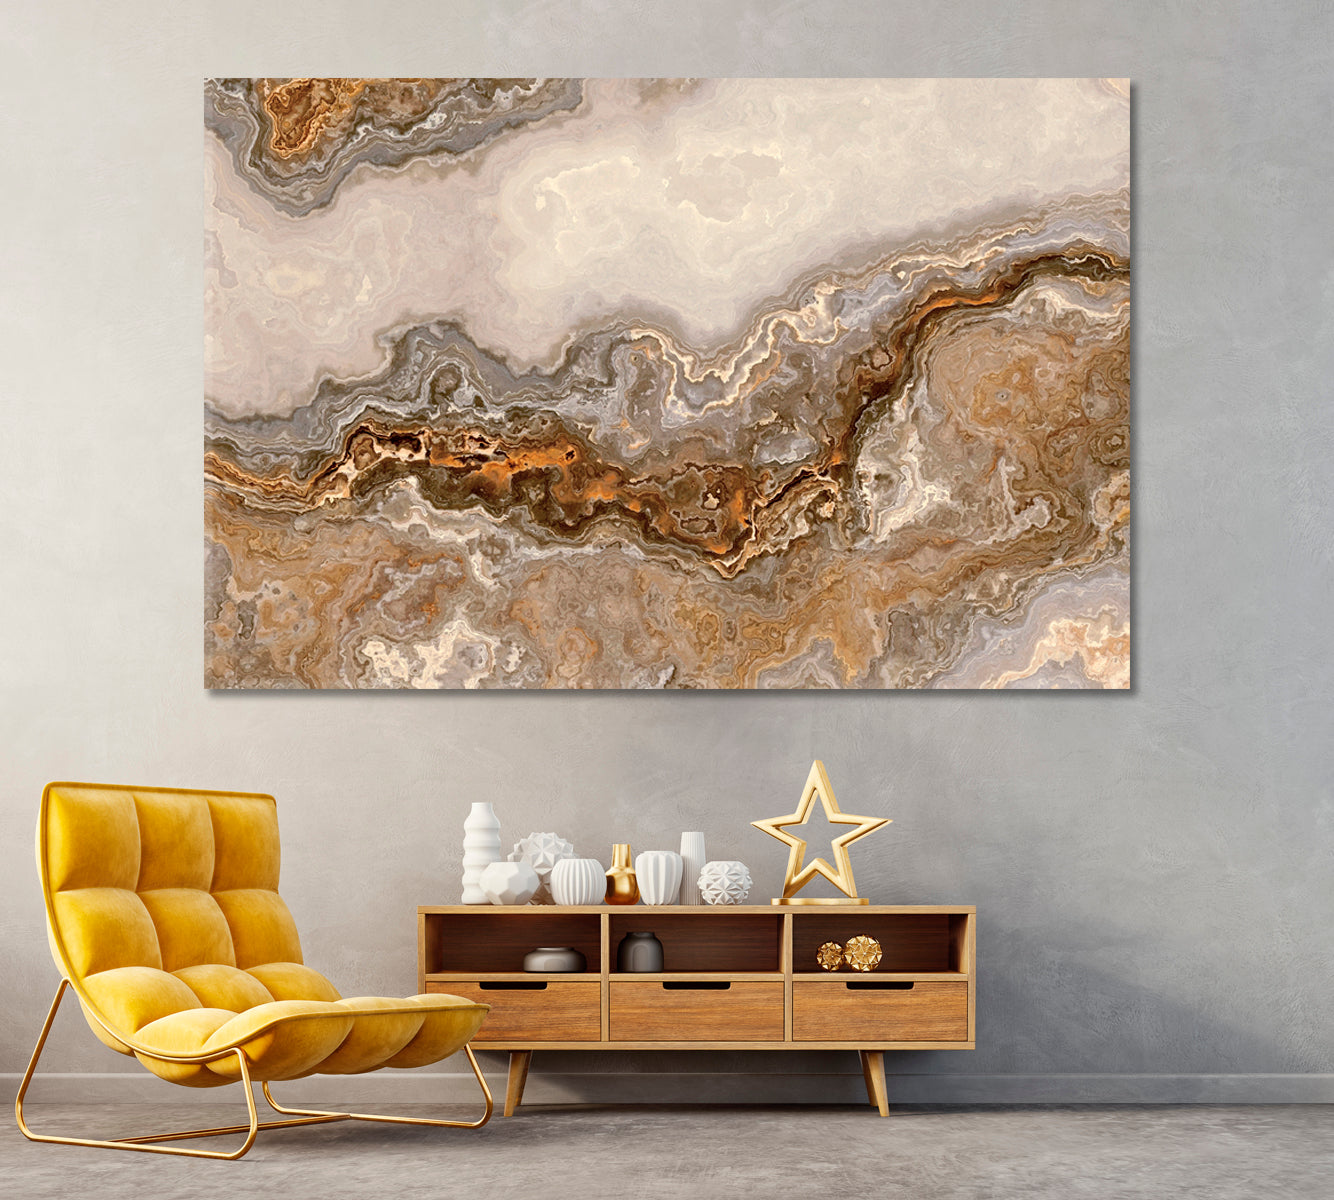 Luxury Curly Marble with Golden Veins Canvas Print ArtLexy 1 Panel 24"x16" inches 